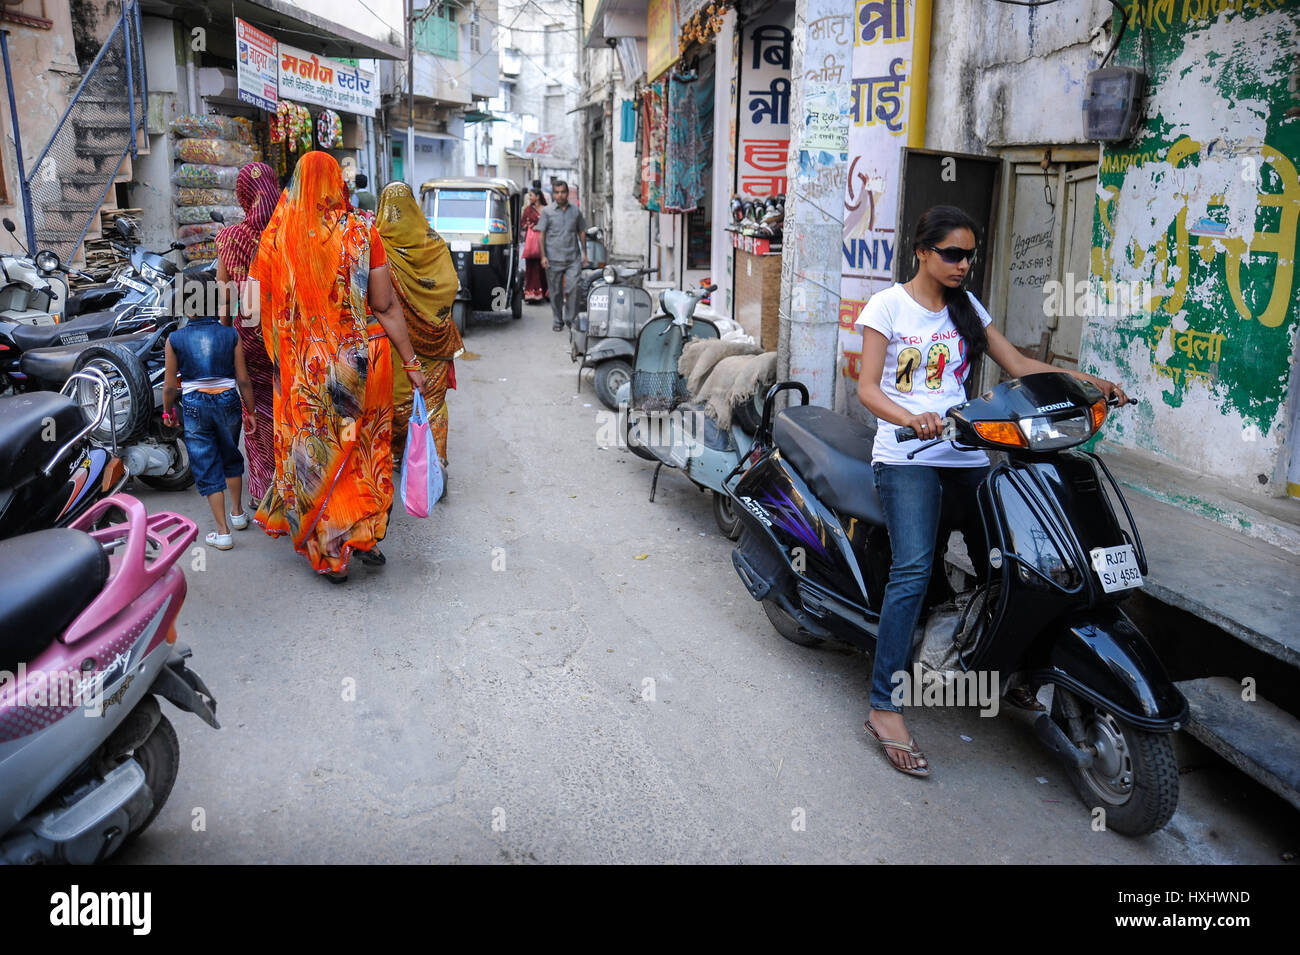 Street scene in Udaipur with women in traditional dress and young girl in modern dress on a moped Stock Photo